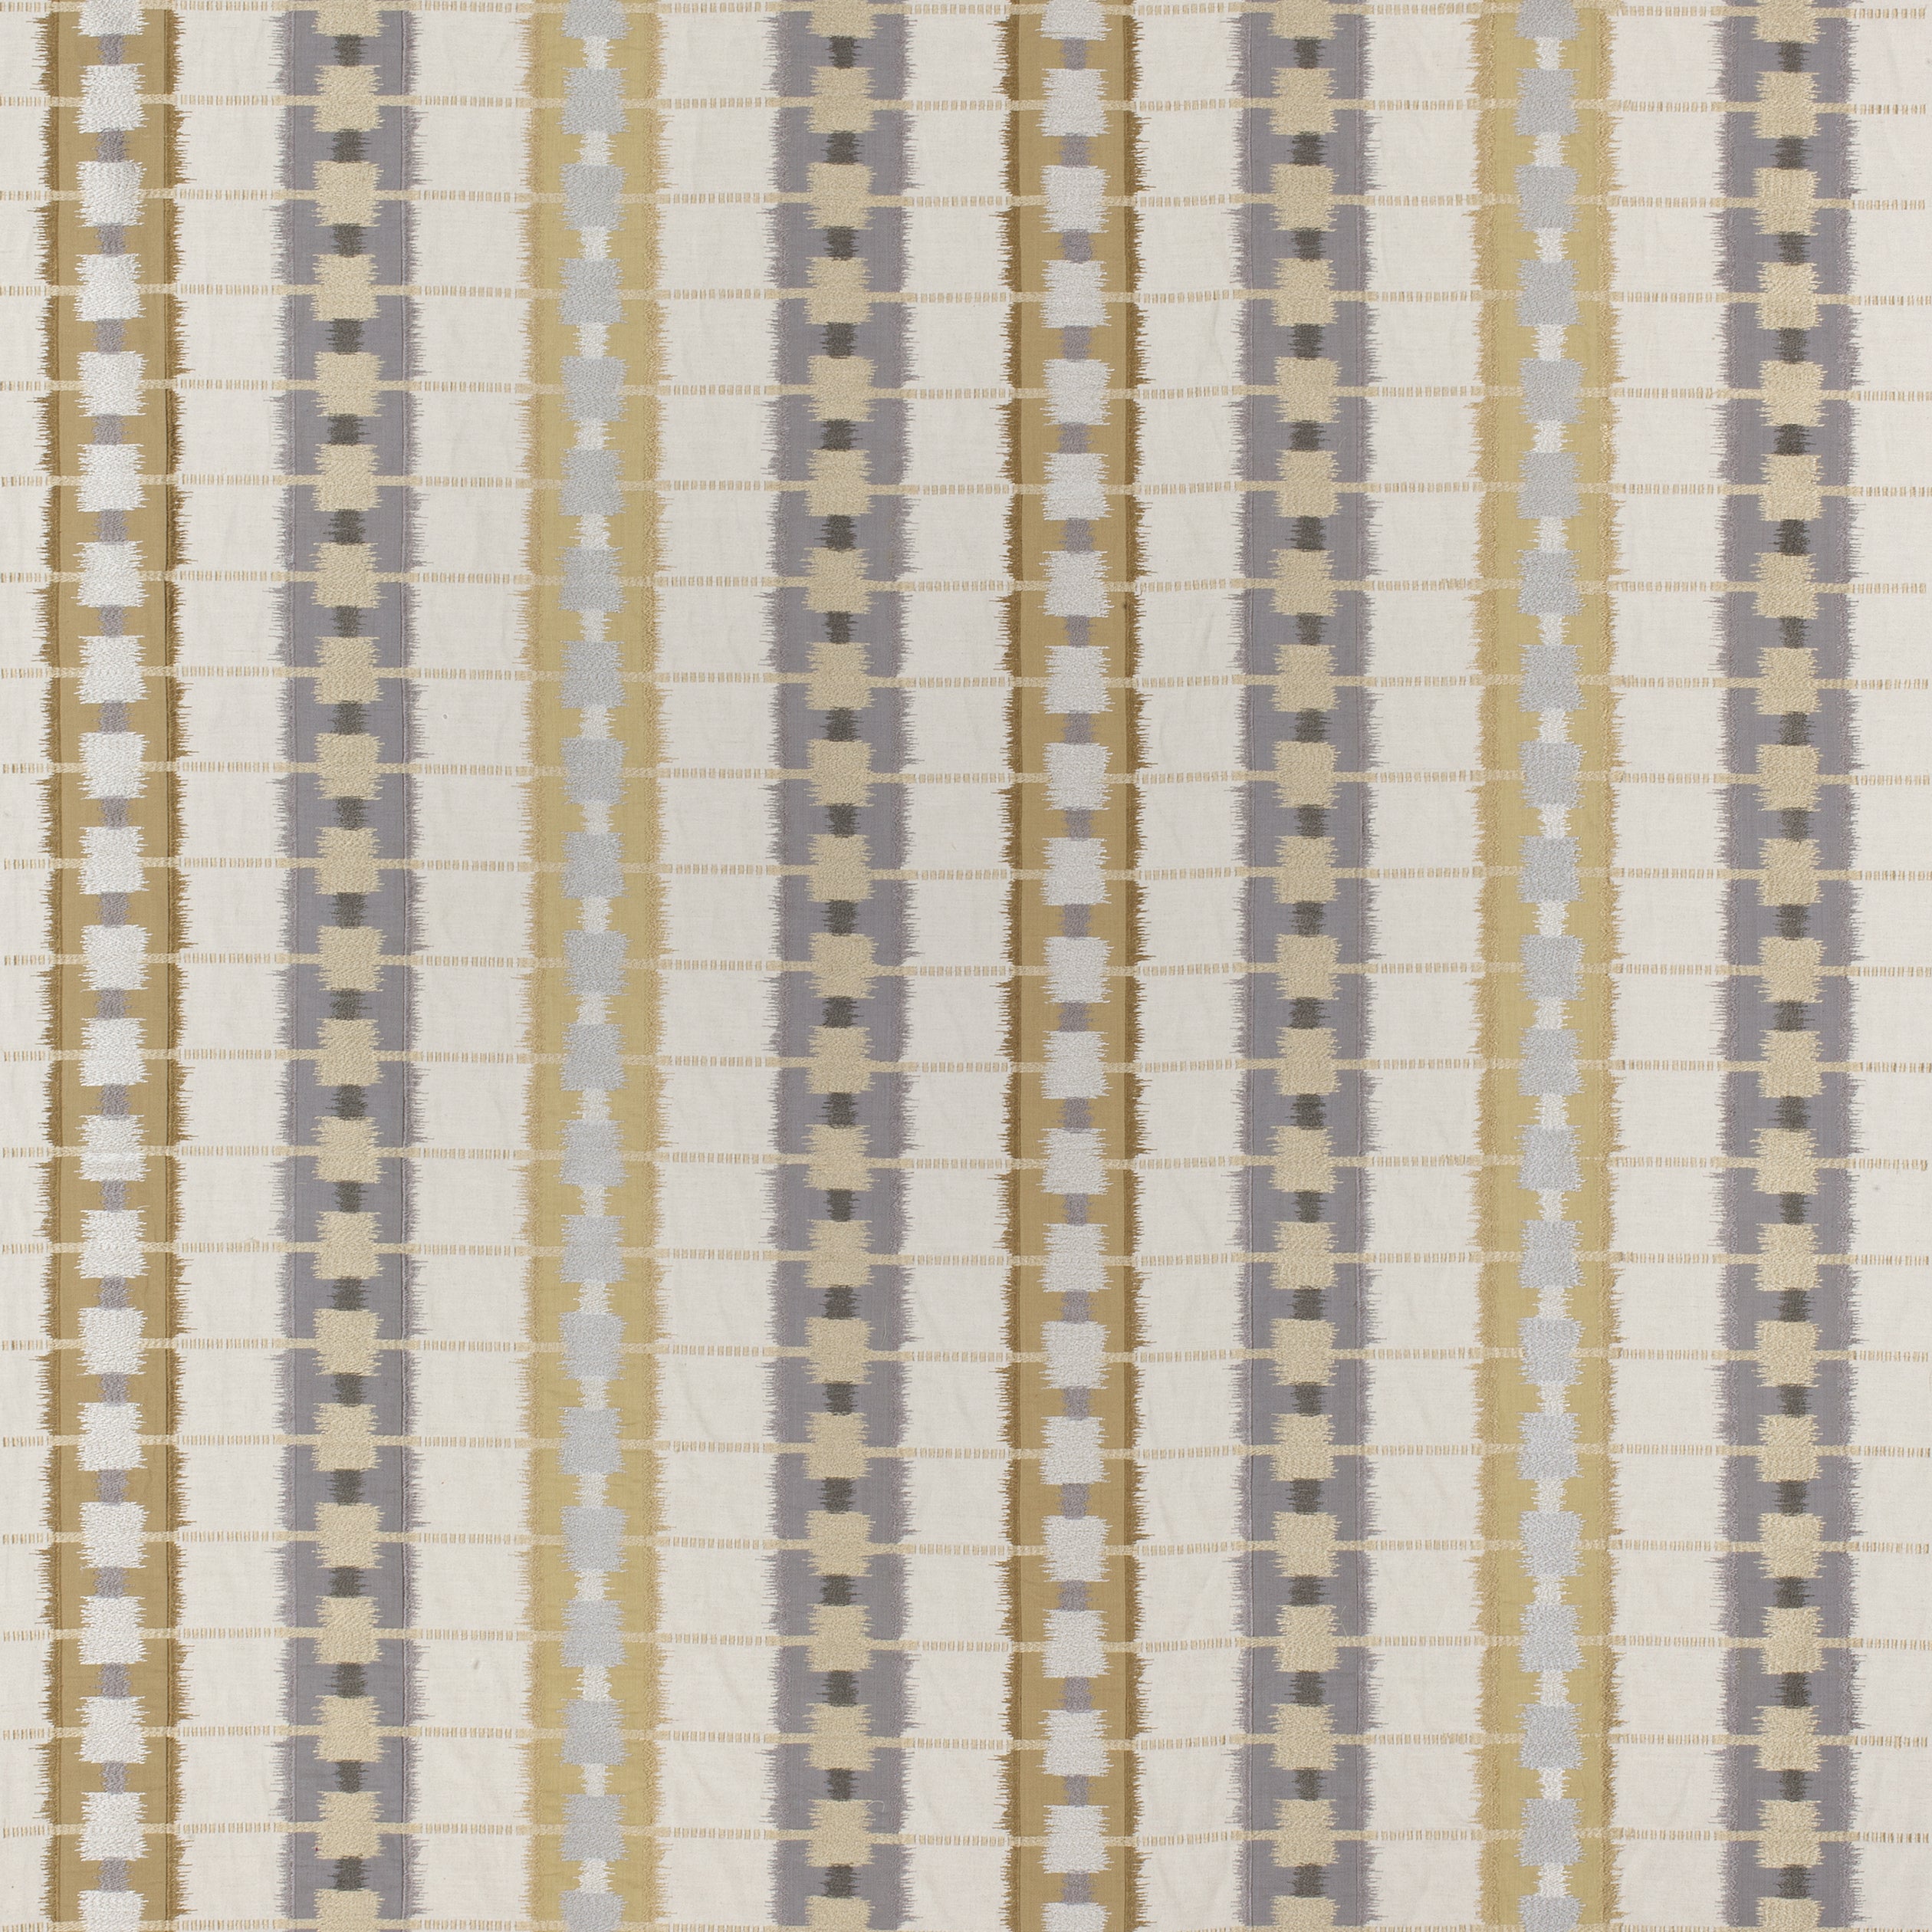 Sri Lanka Embroidery fabric in grey color - pattern number W788712 - by Thibaut in the Trade Routes collection